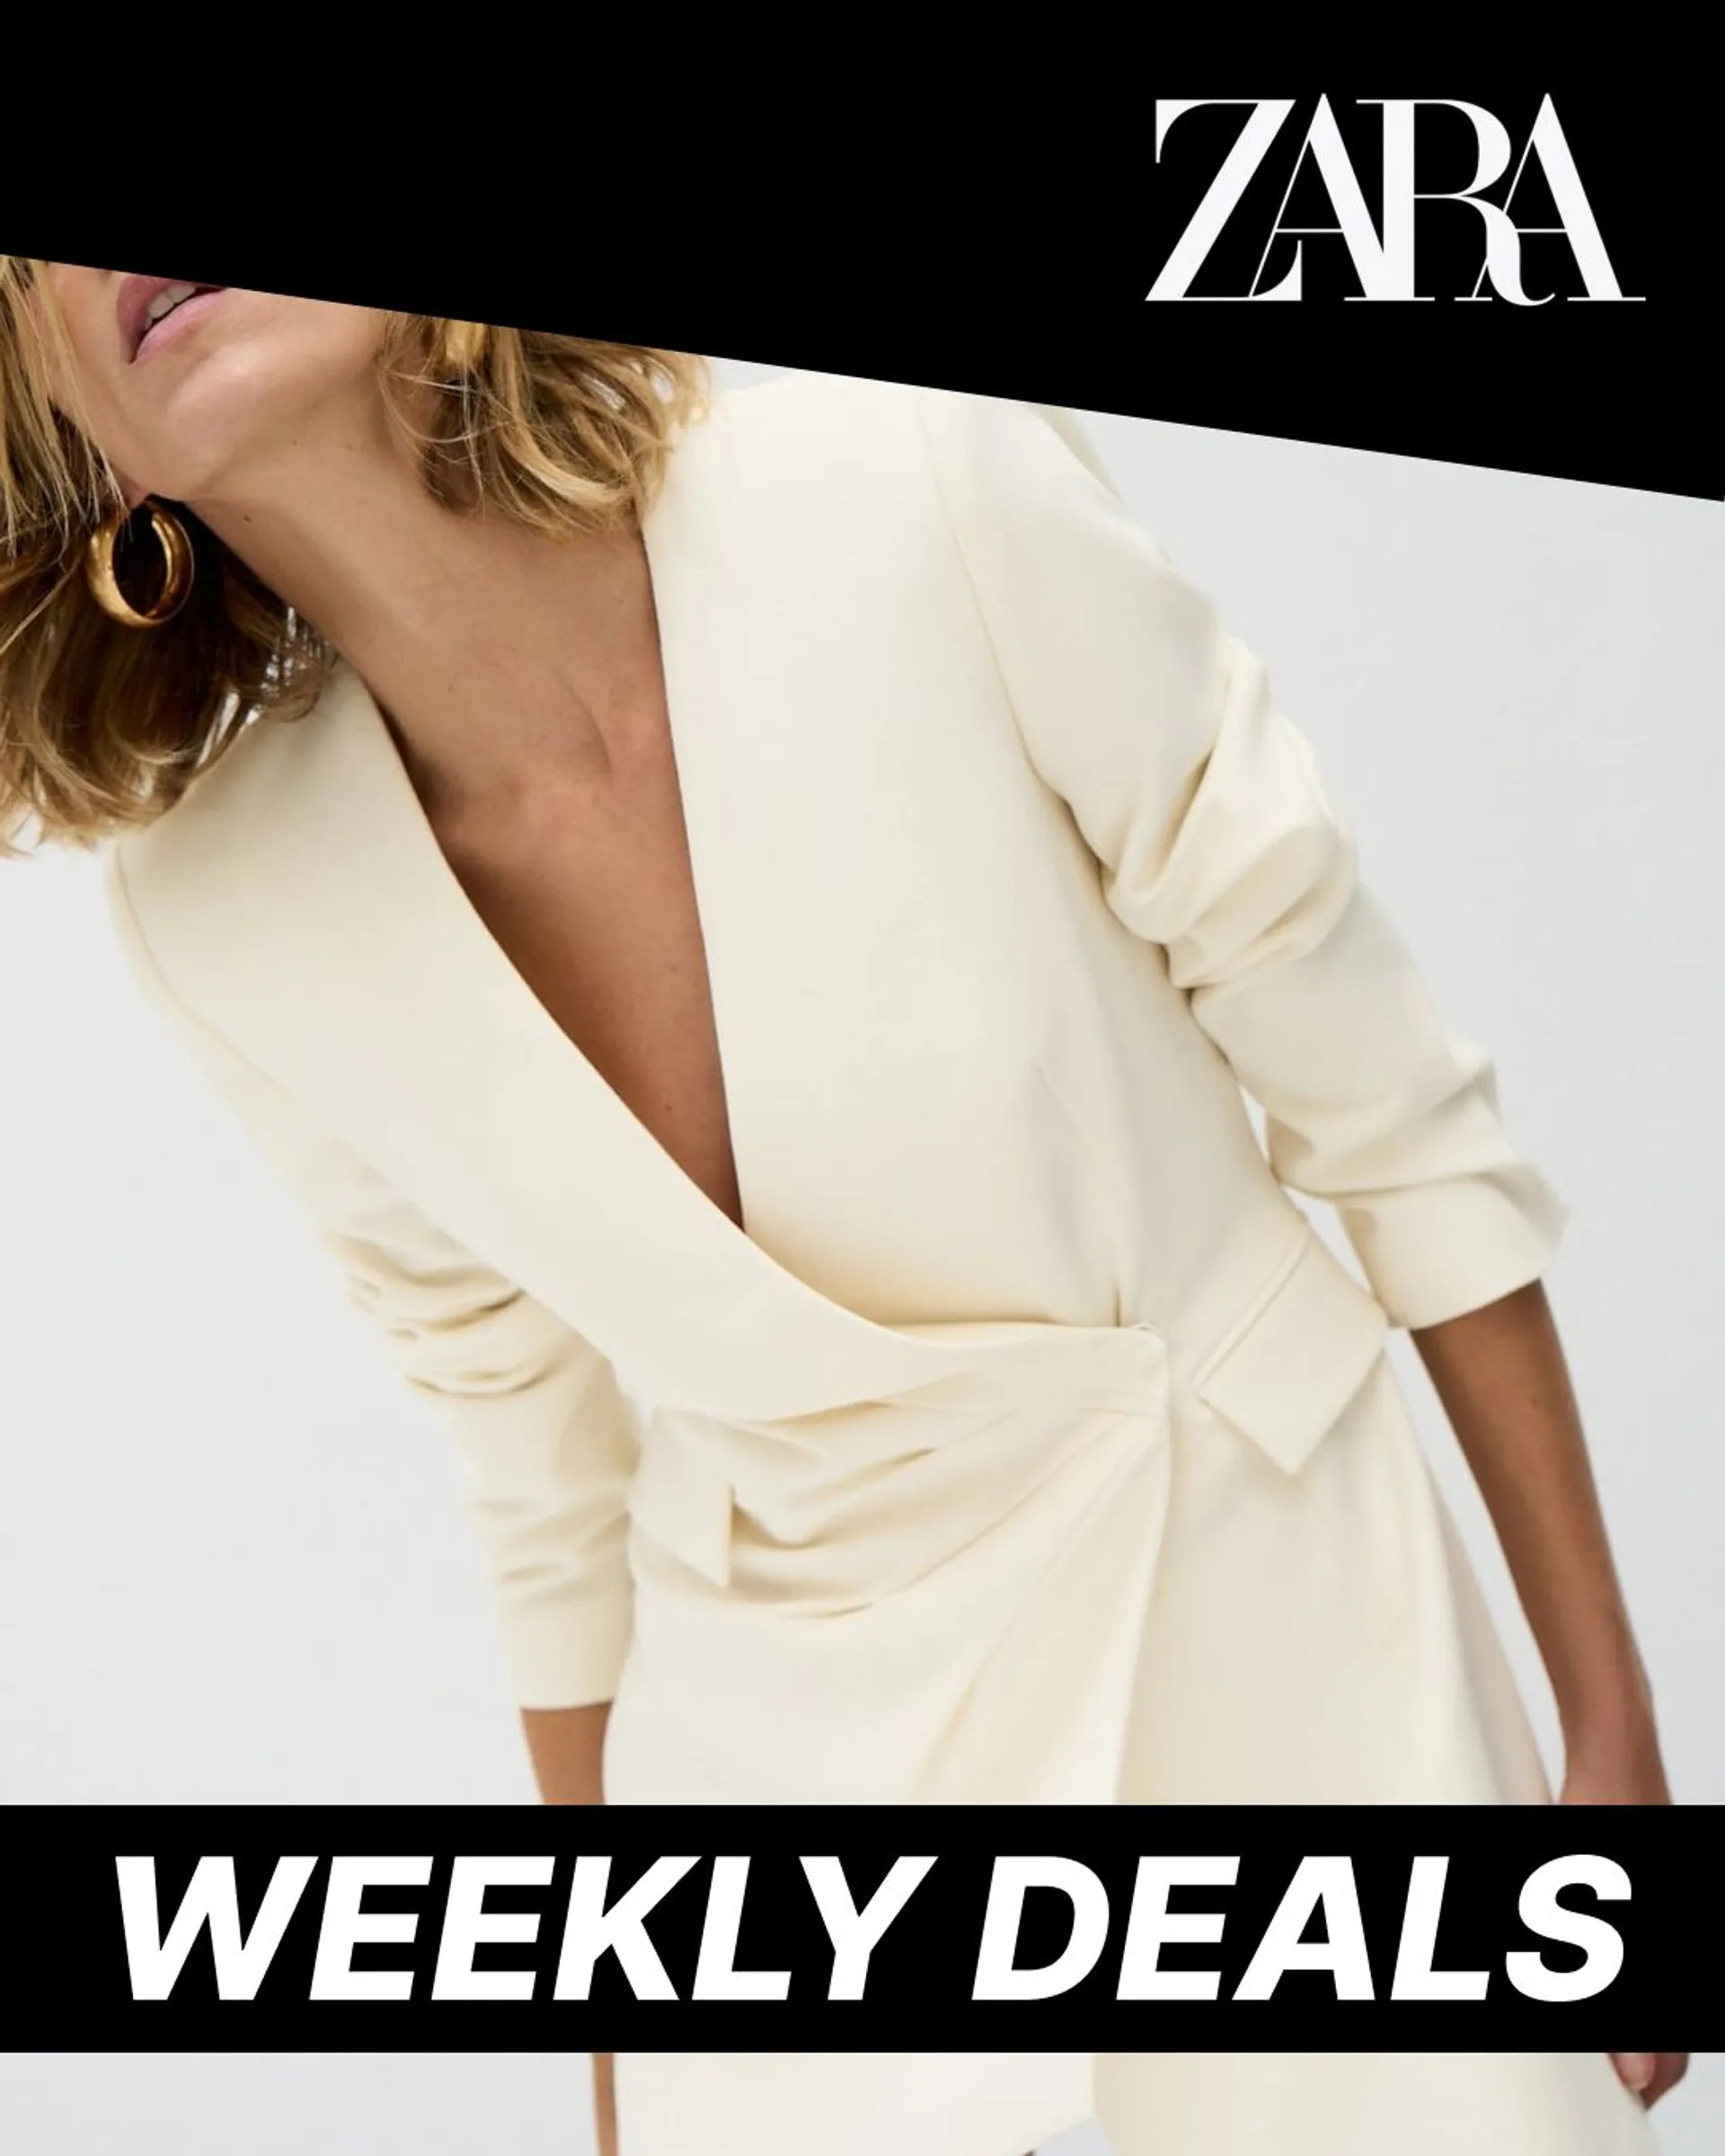 Zara - Special Price! from February 2 to February 7 2023 - flyer page 1